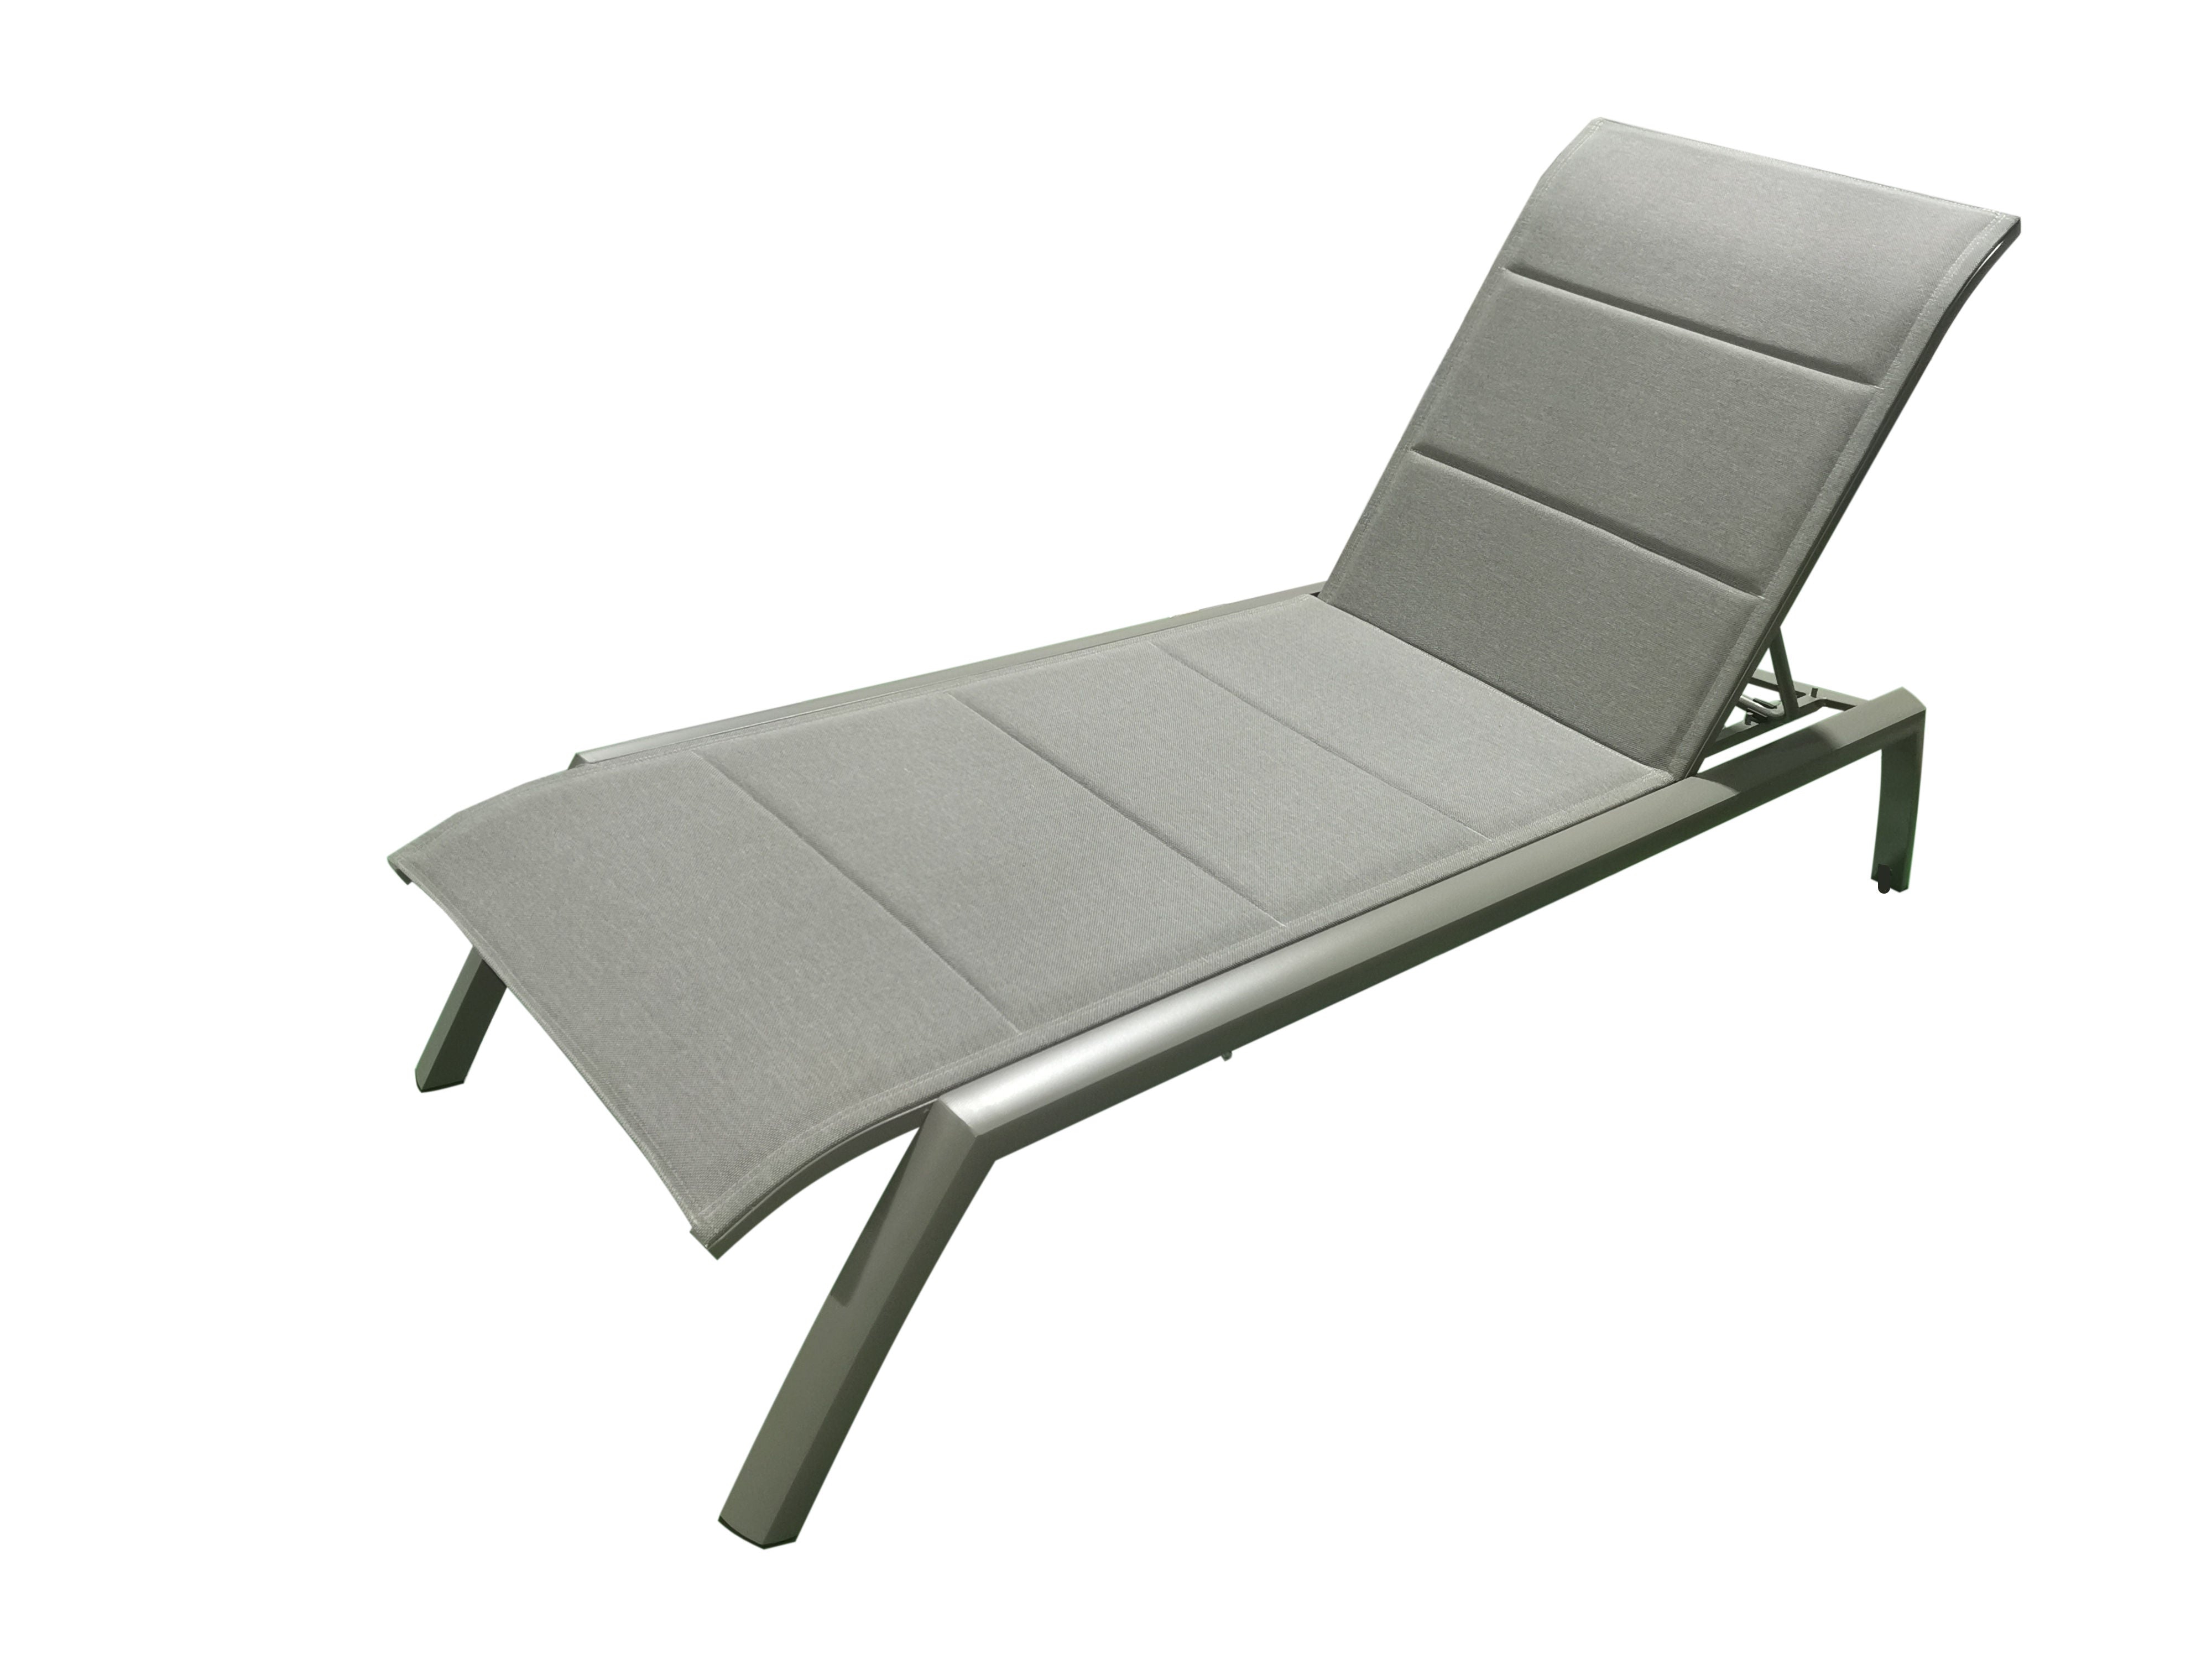 MOSS MOSS-0445TMA - Akumal Collection, Taupe matte aluminum reclining & stackable lounger chair with convenient small back wheels & with taupe mix quick dry padded textilene 28 1/2" x 80" x H 14"